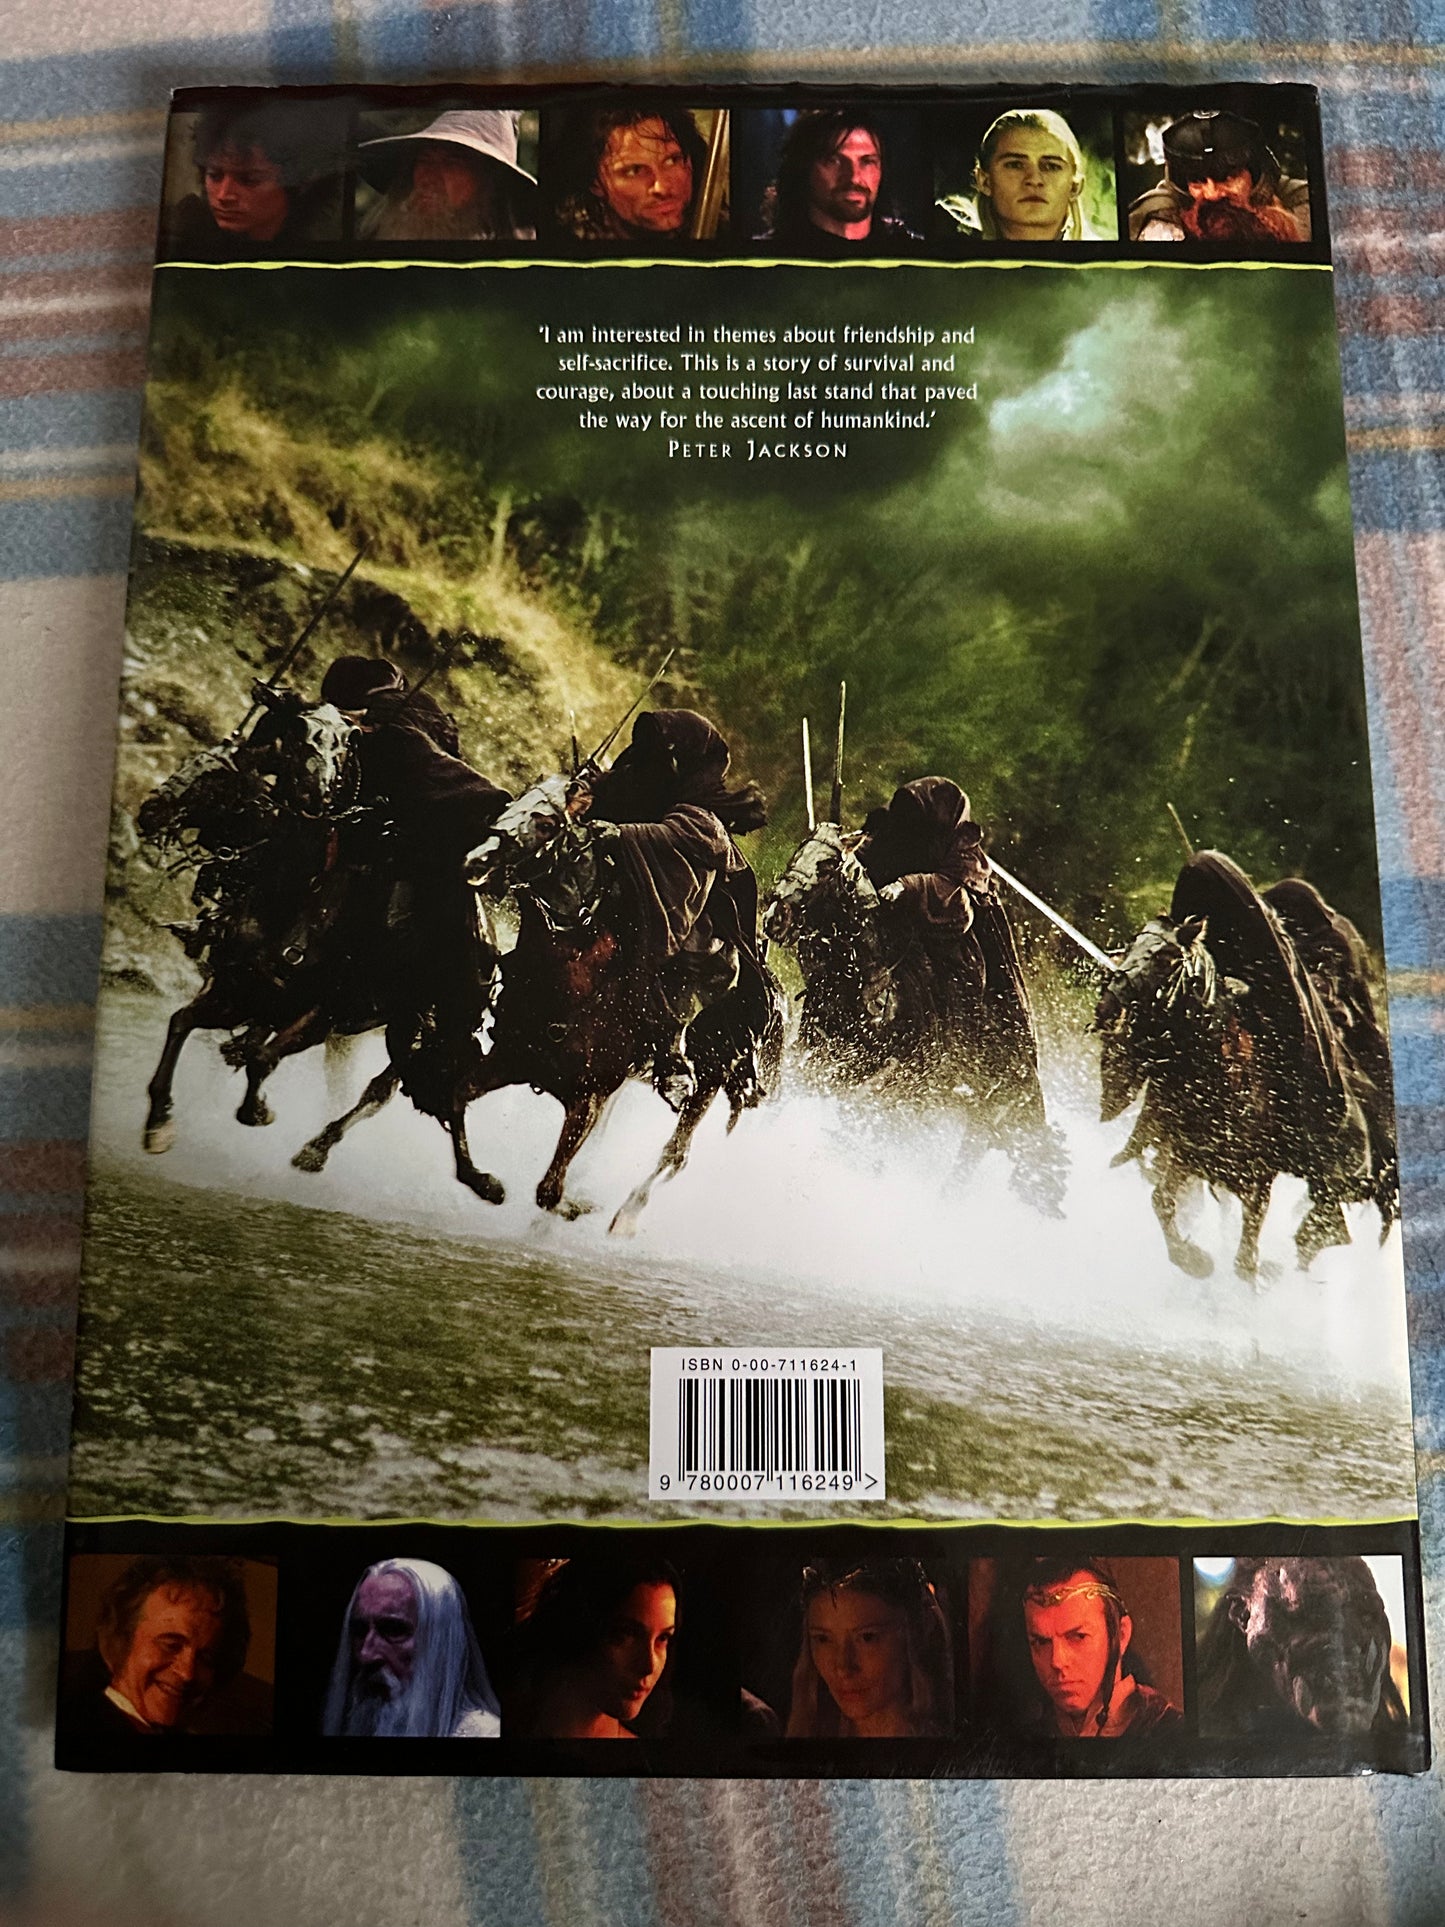 2001 The Lord Of The Rings: The Fellowship Of The Ring - JRR Tolkien(Visual Companion)Jude Fisher (HarperCollins)